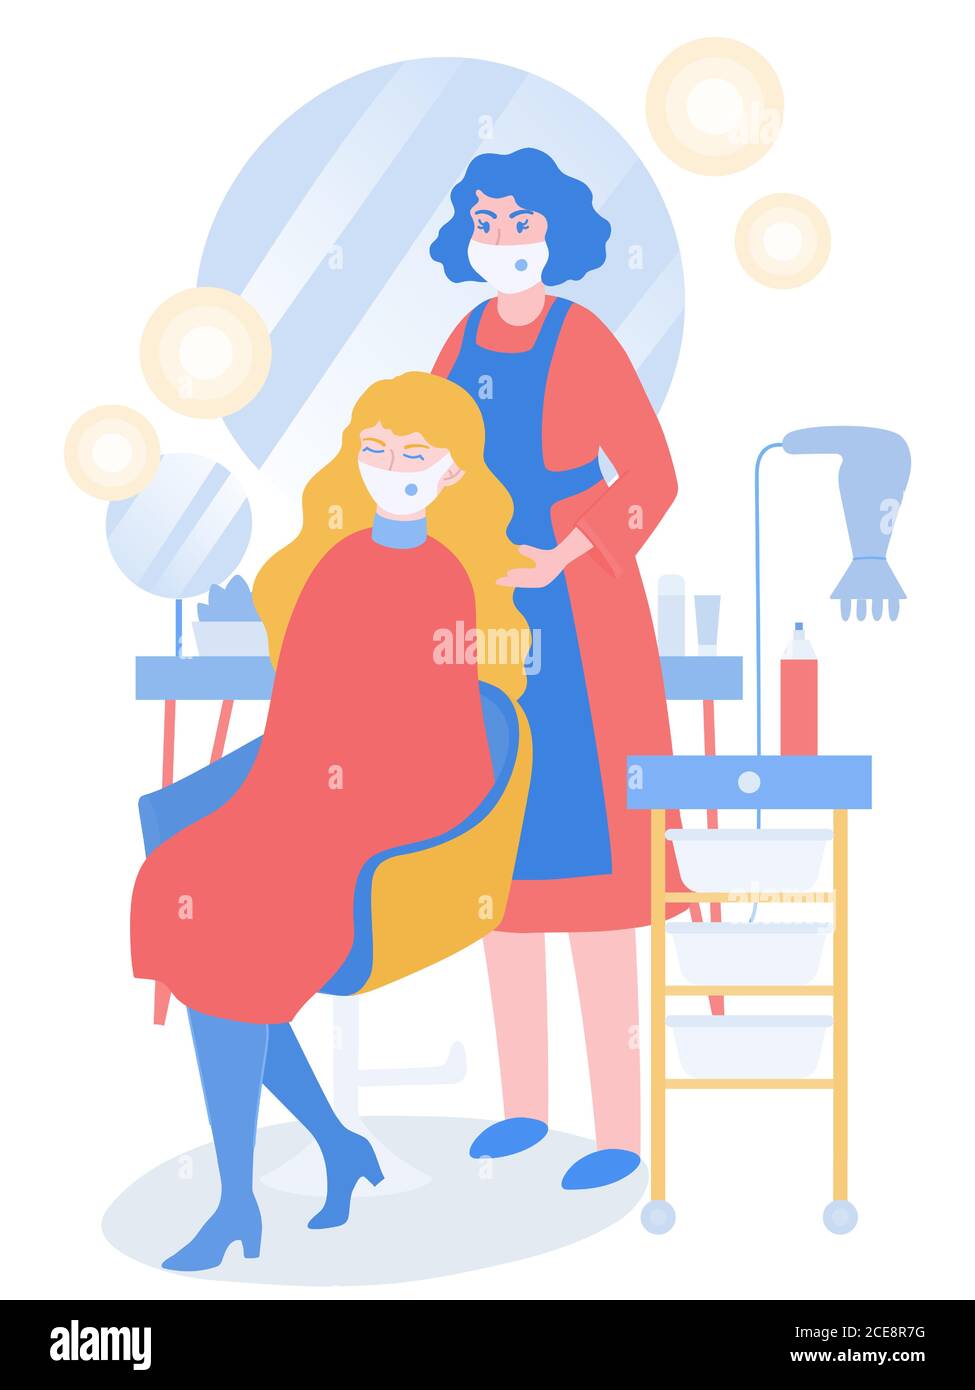 Coronavirus prevention in beauty salons during pandemic. Hairdresser in mask cut client, considering prevention rules Stock Vector